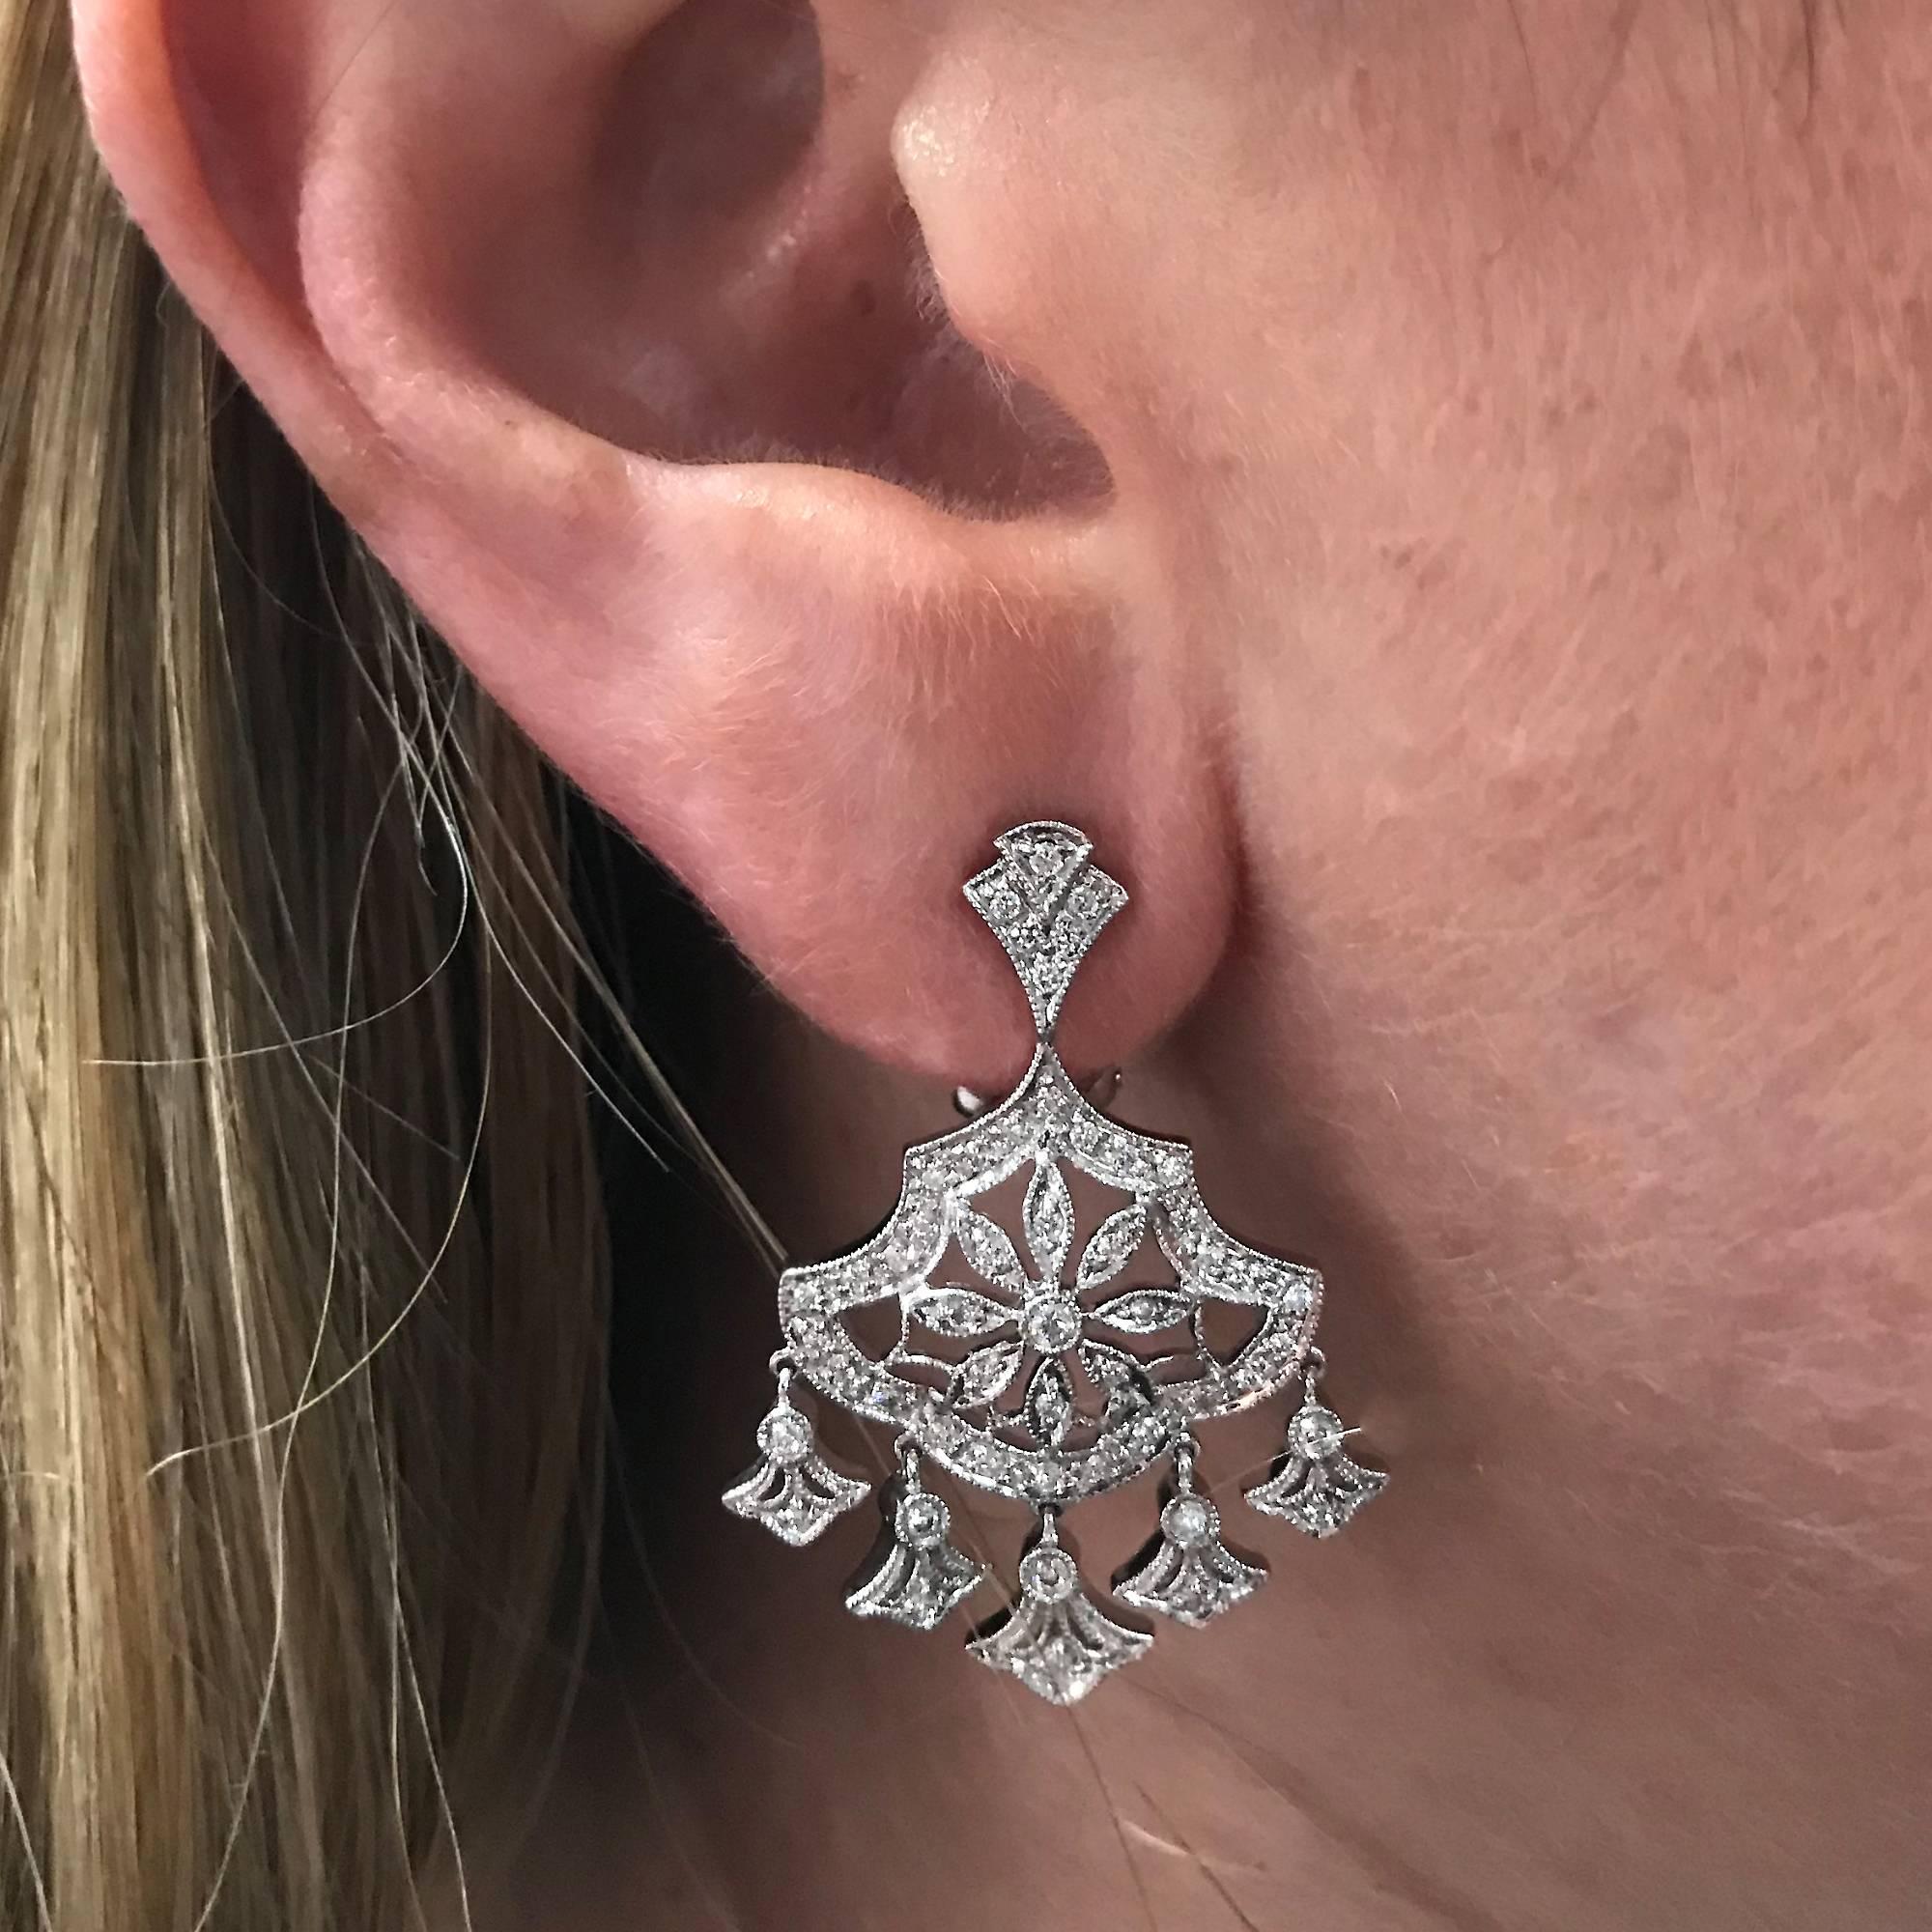 14k white gold earrings featuring 100 round brilliant cut diamonds weighing approximately 1ct total G color VS clarity.  

Our pieces are all accompanied by an appraisal performed by one of our in-house GIA Graduates. They are also accompanied by